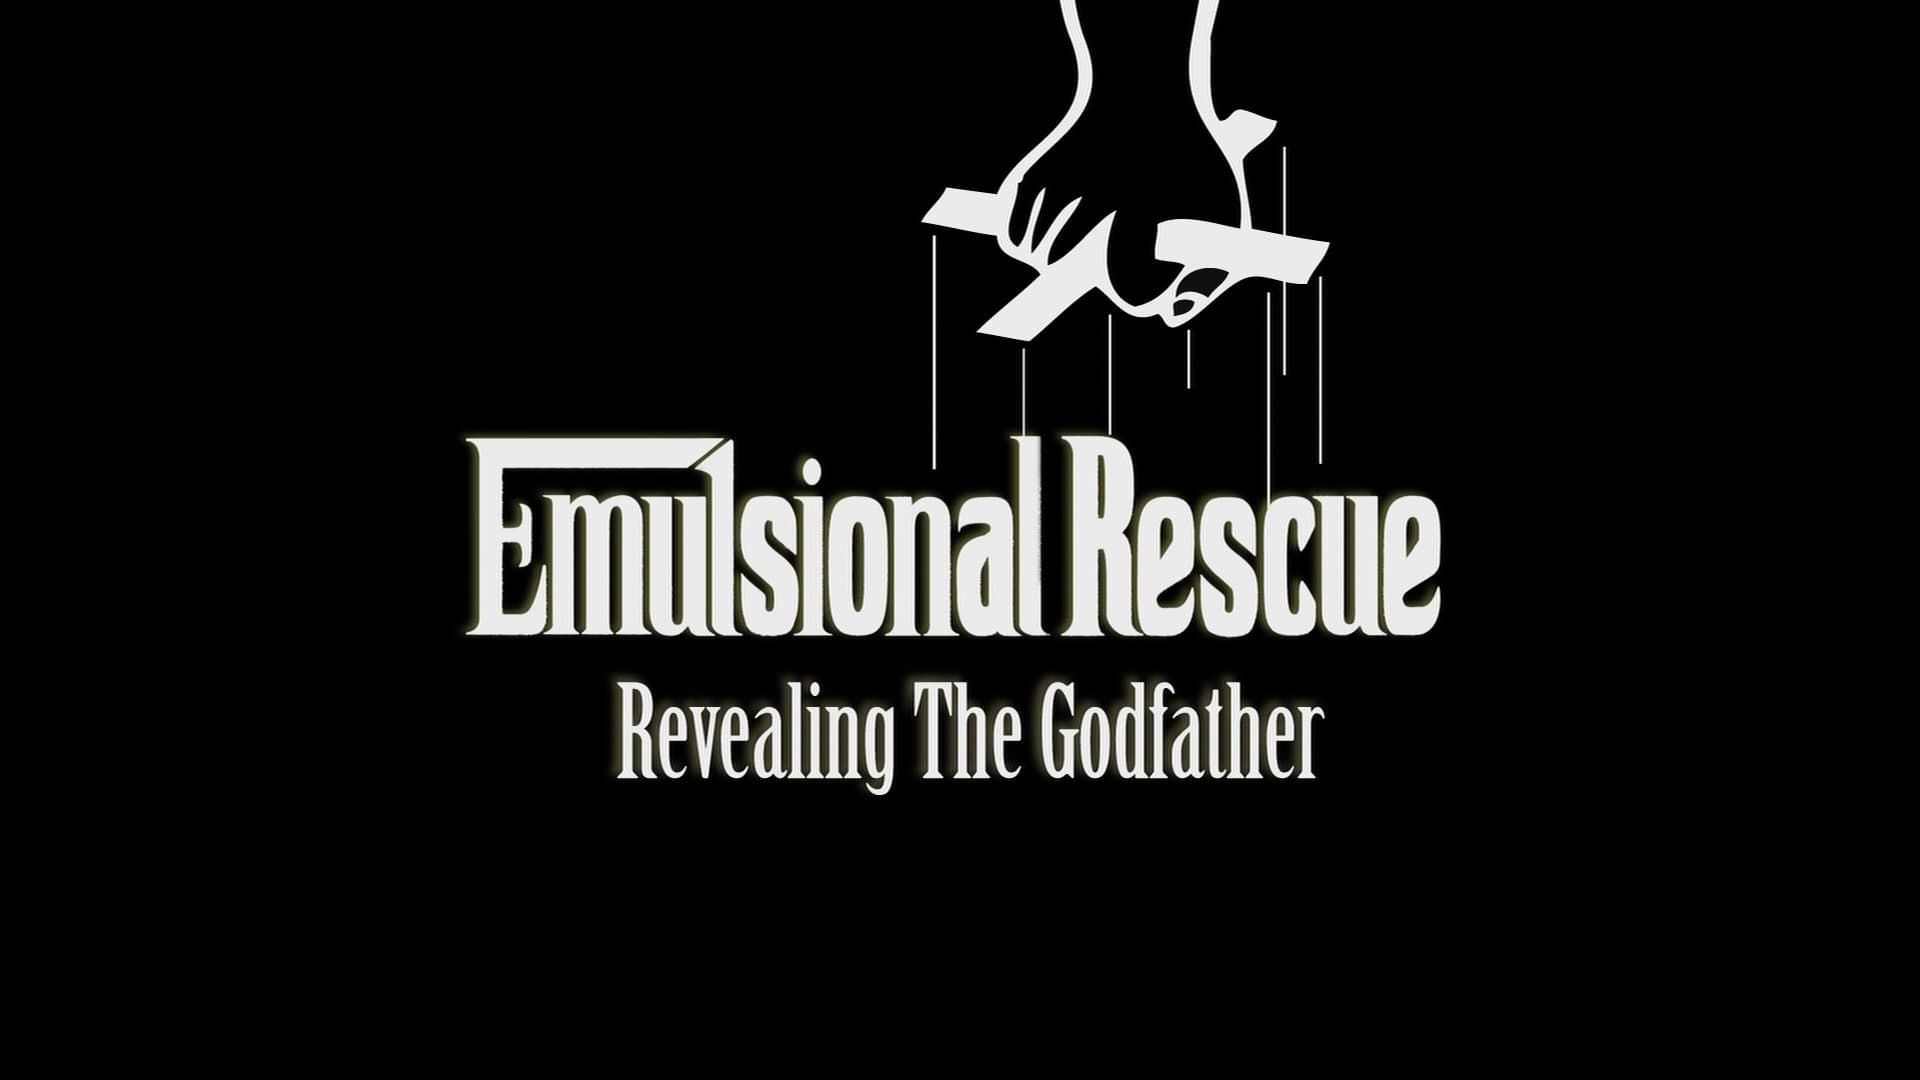 Emulsional Rescue: Revealing 'the Godfather' background